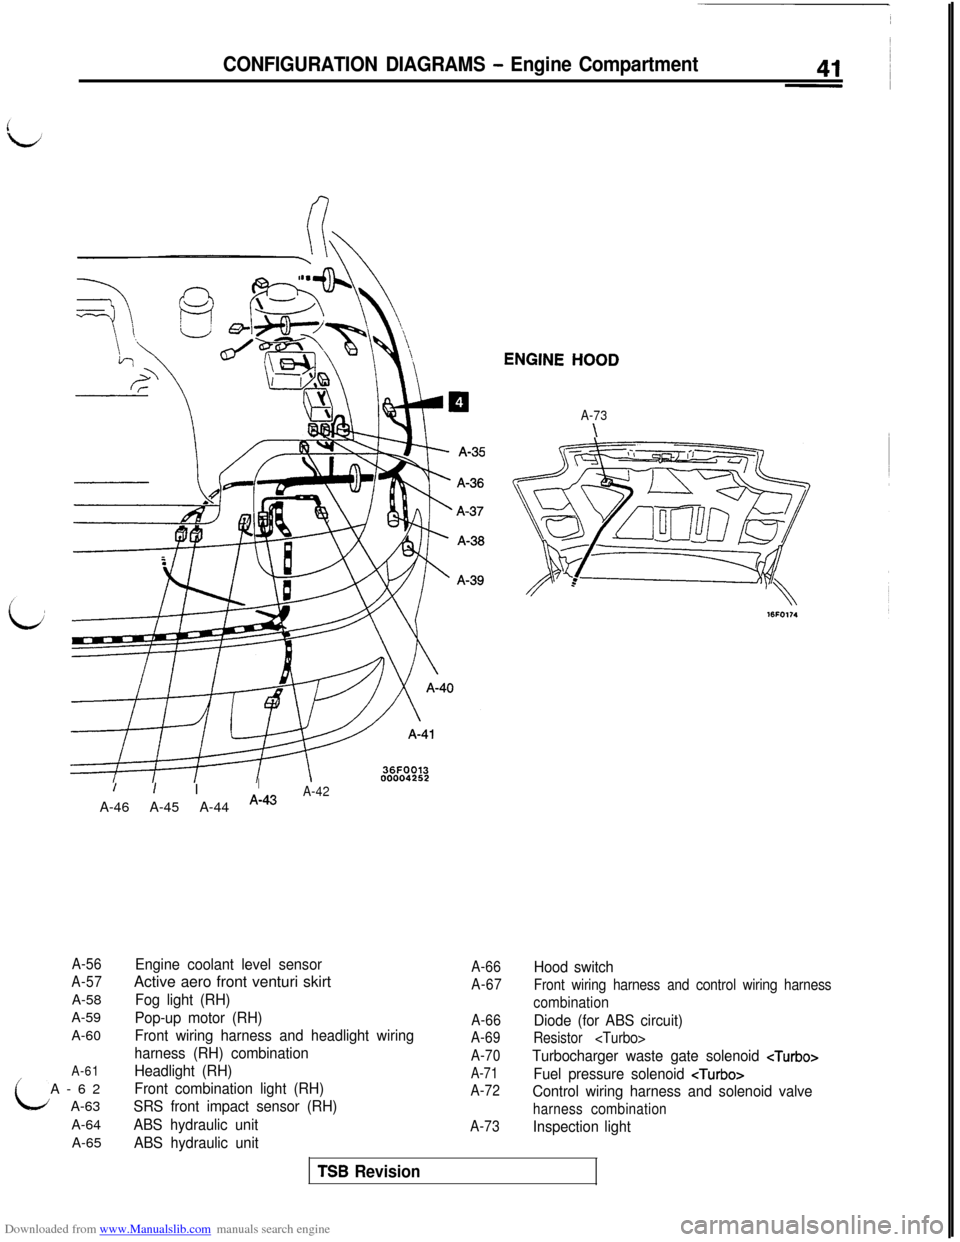 MITSUBISHI 3000GT 1994 2.G Service Manual Downloaded from www.Manualslib.com manuals search engine CONFIGURATION DIAGRAMS - Engine CompartmentENGINE 
HOOD
A-73
\
/I IIA-46 A-45 A-44 
A-43A-42
A-56
A-57A-58
A-59
A-60
A-61A-62
A-63
A-64
A-65
En